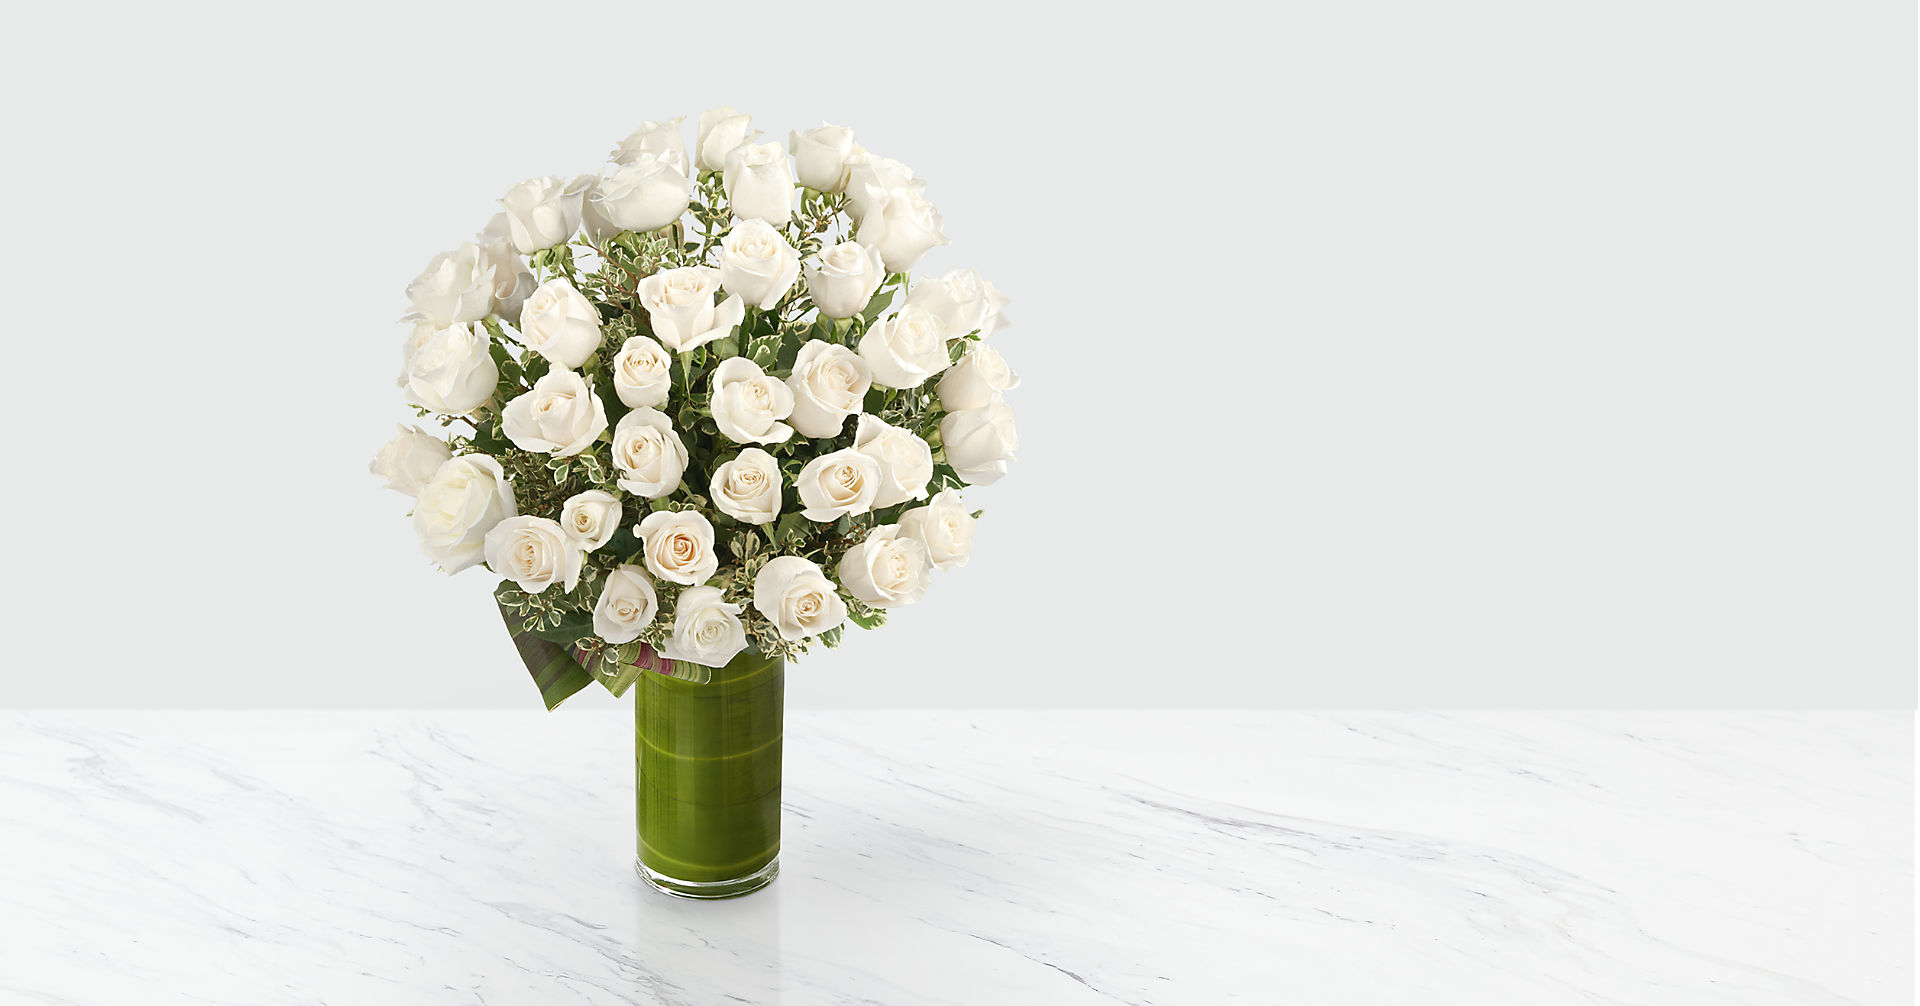 Clarity Luxury Rose Bouquet - 24-inch Premium Long-Stemmed Roses